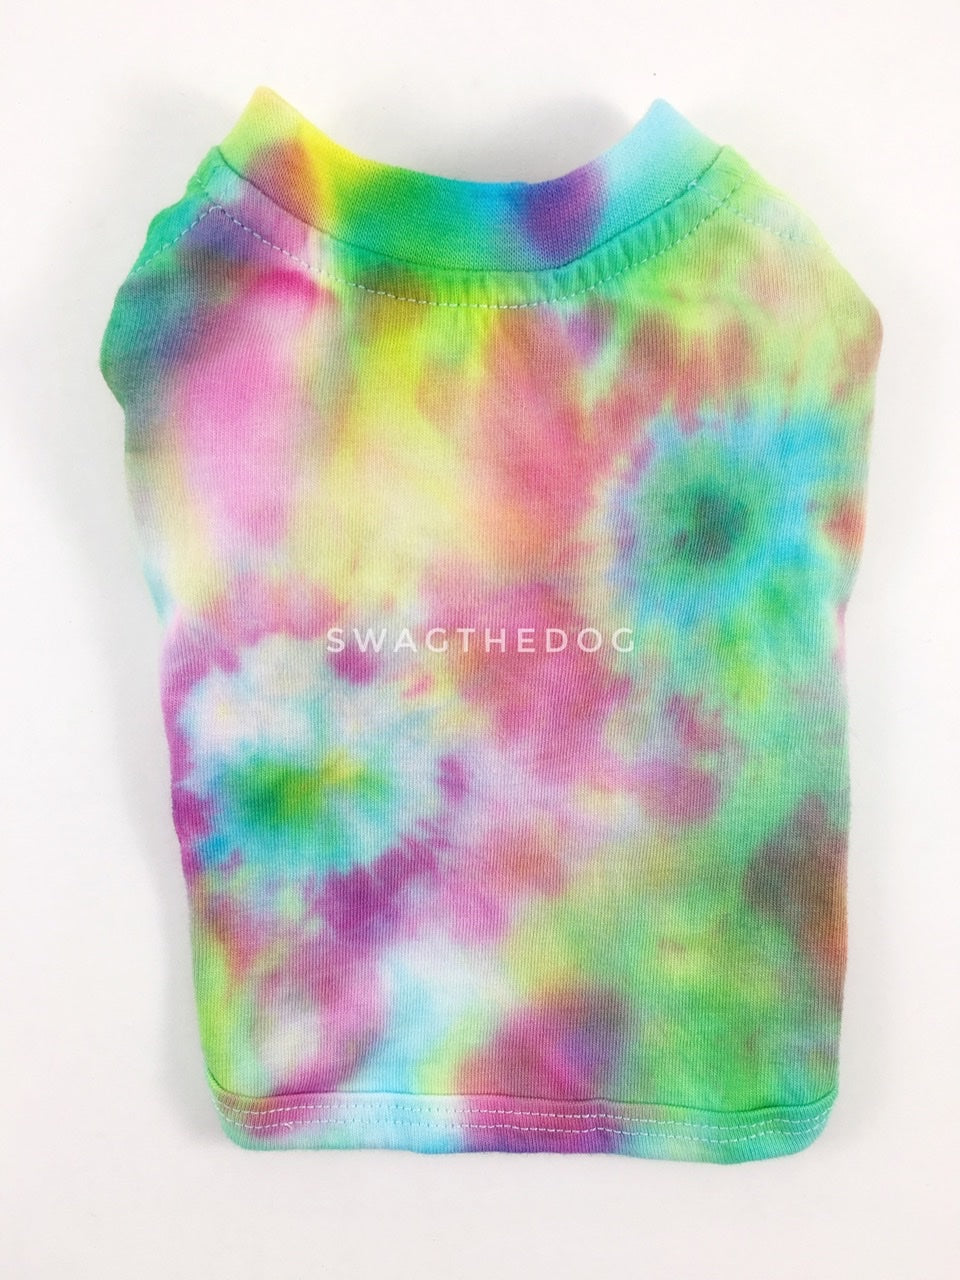 Swagadelic Hipster Tie Dye Tee - Product back view. The hand tie-dyed tee with Pink, Yellow and Sky Blue